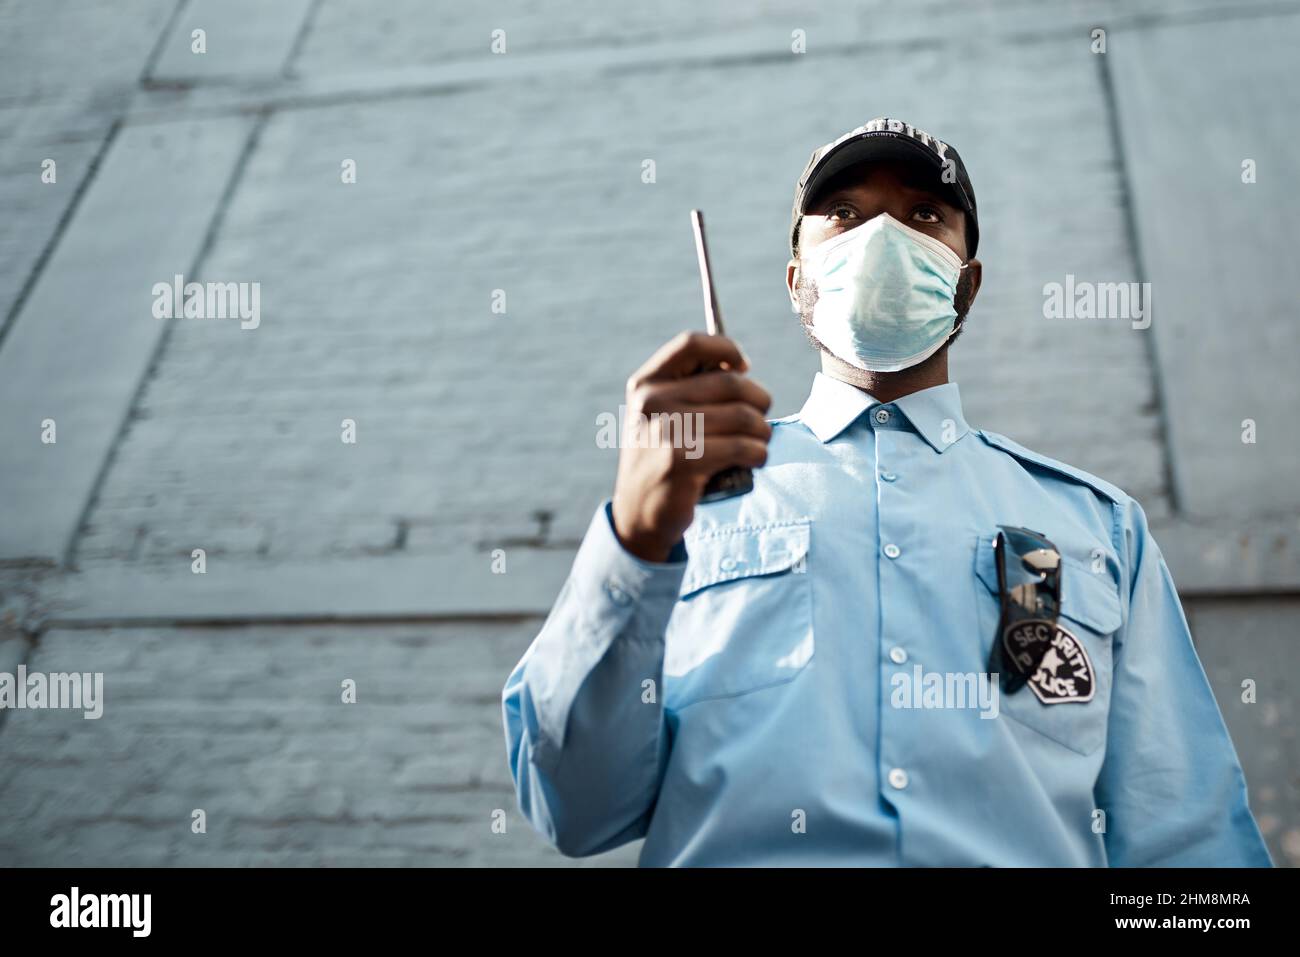 Proactive guarding for your propertys protection. Shot of a masked young security guard using a two way radio while on patrol outdoors. Stock Photo